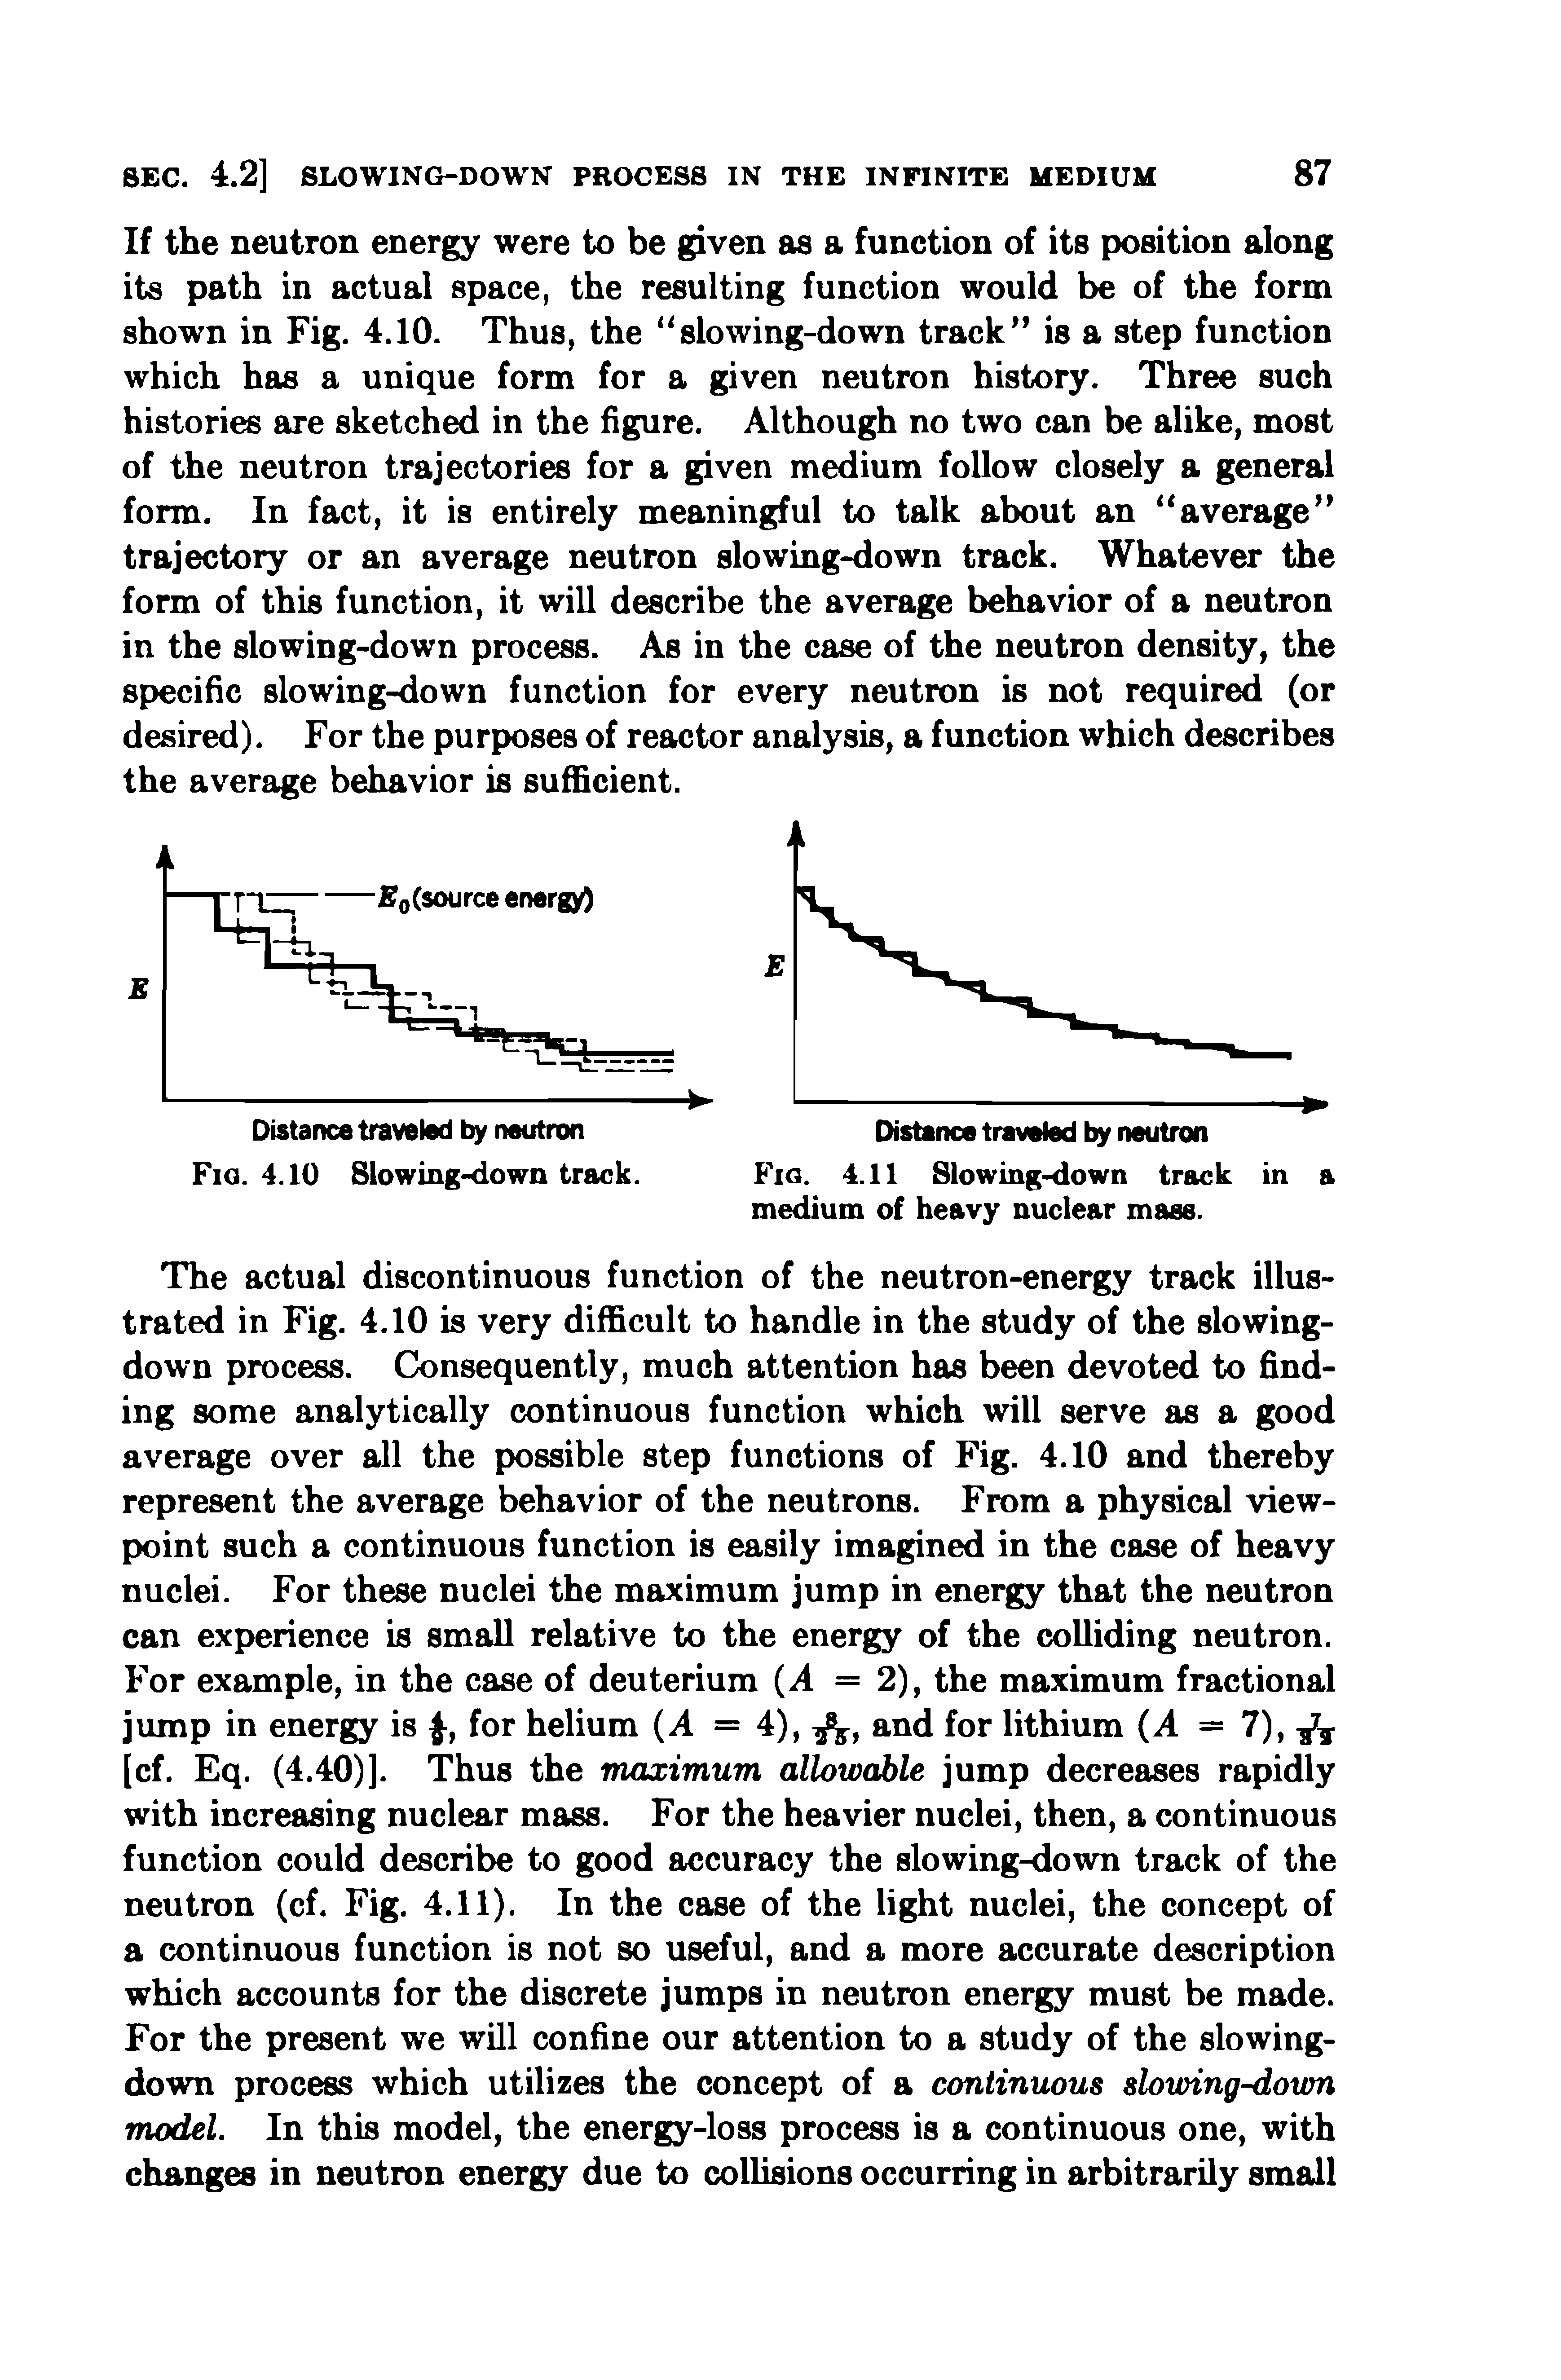 Fig. 4.11 Slowing-down track in a medium of heavy nuclear mass.